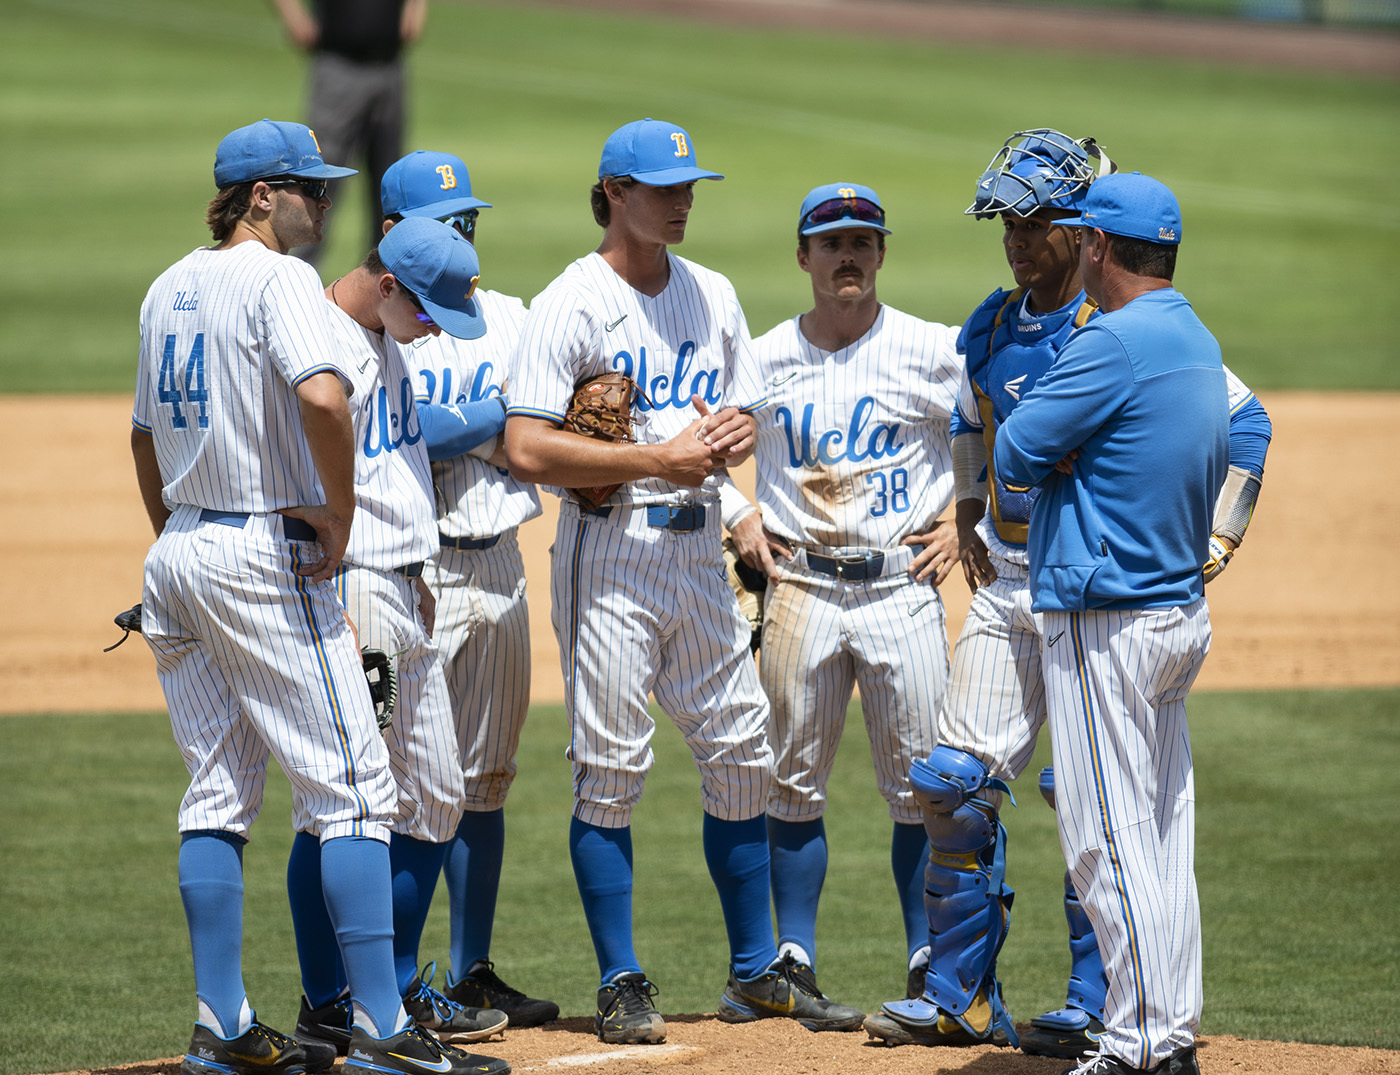 UCLA baseball ends Pac-12 tournament run with walk-off loss to Oregon State  - Daily Bruin